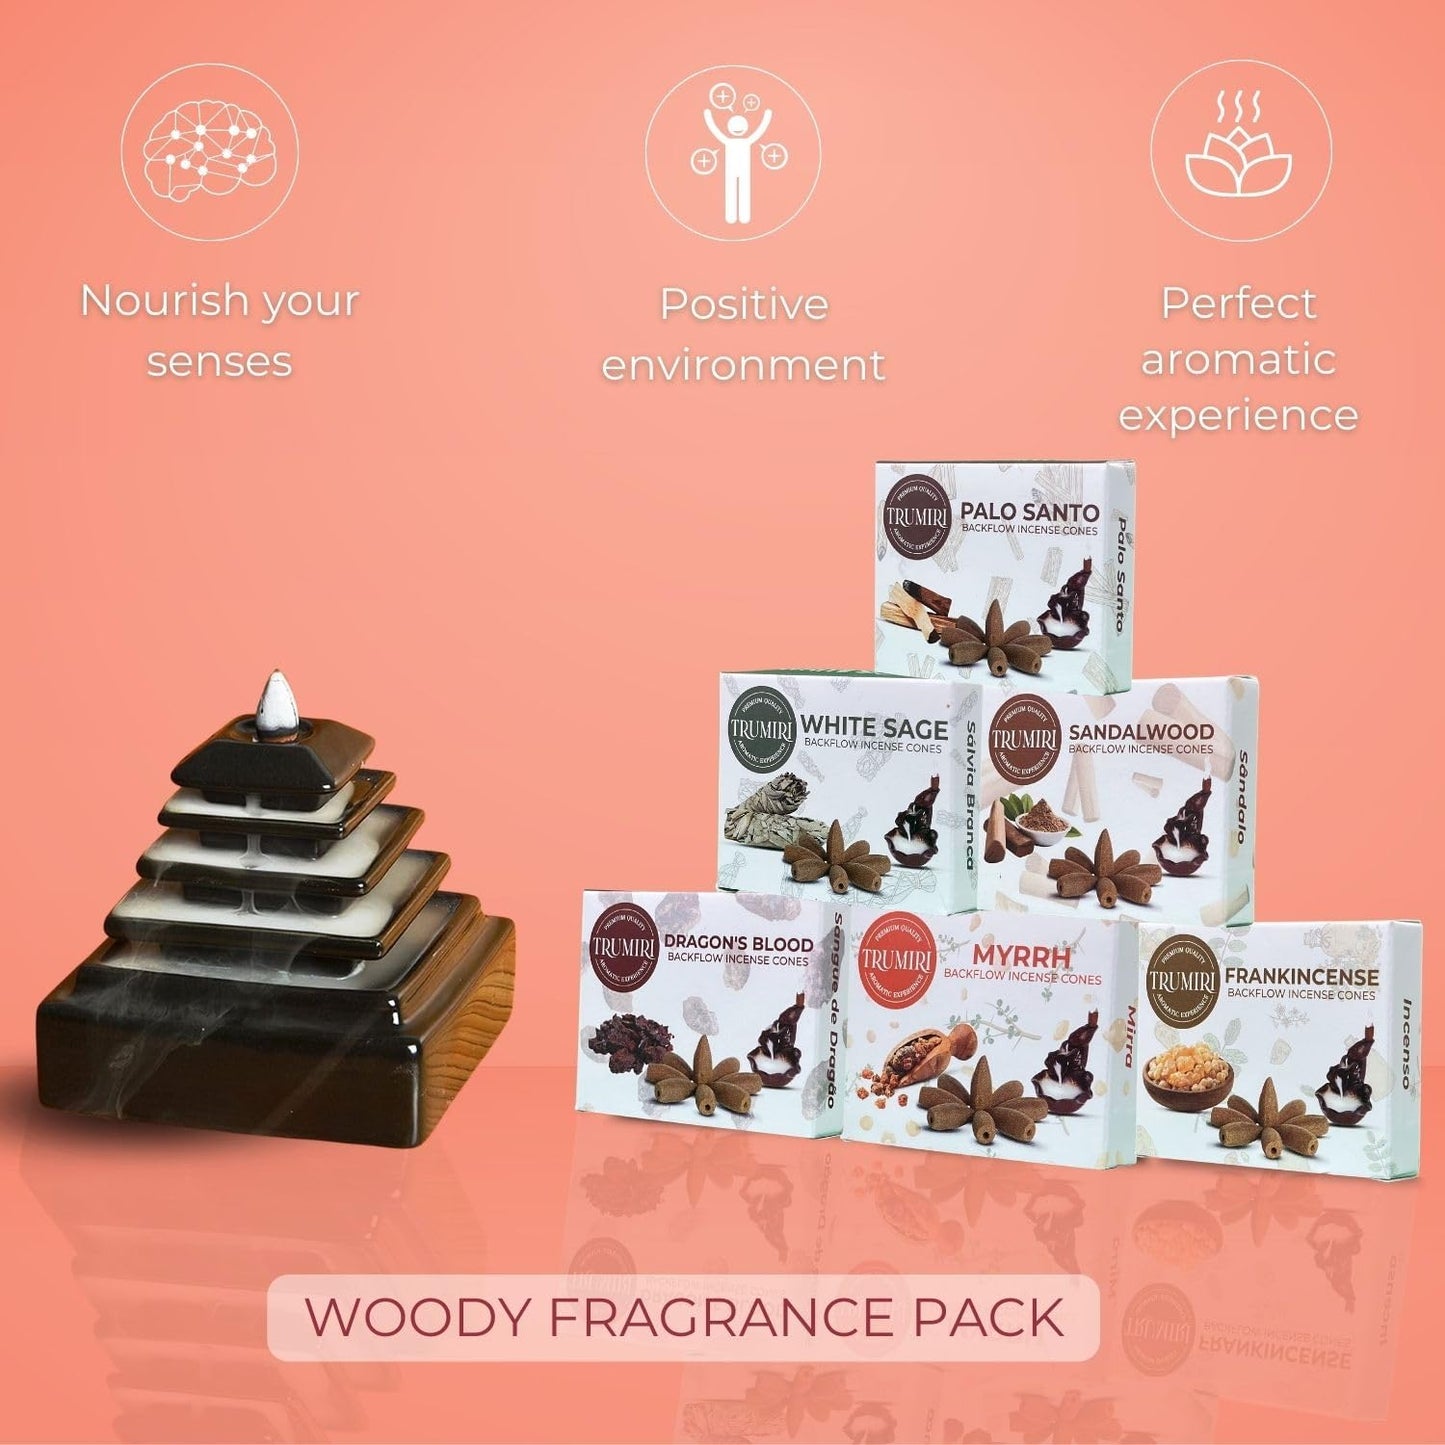 Trumiri Woody Scents Backflow Incense Cones Variety Pack of 6 Scents with 10 Backflow Cones per Scent - Total 60 Cones